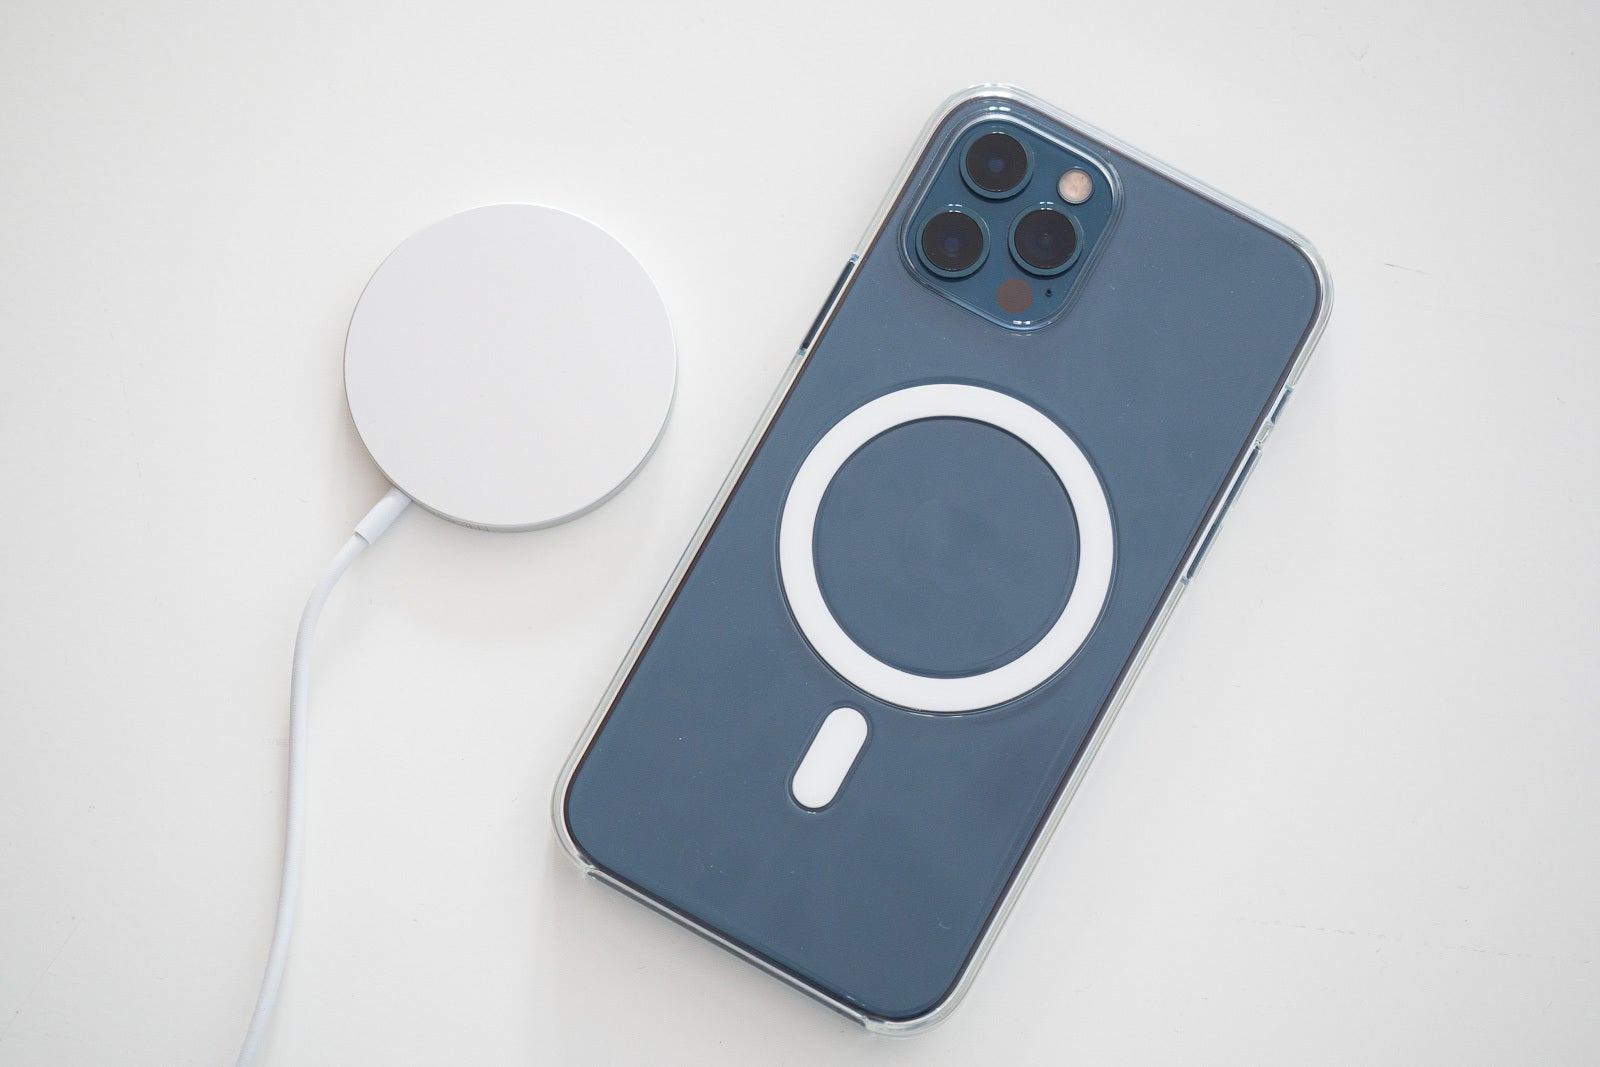 iPhone 12 MagSafe case and wireless charger - Should you buy iPhone 11 Pro in 2021?